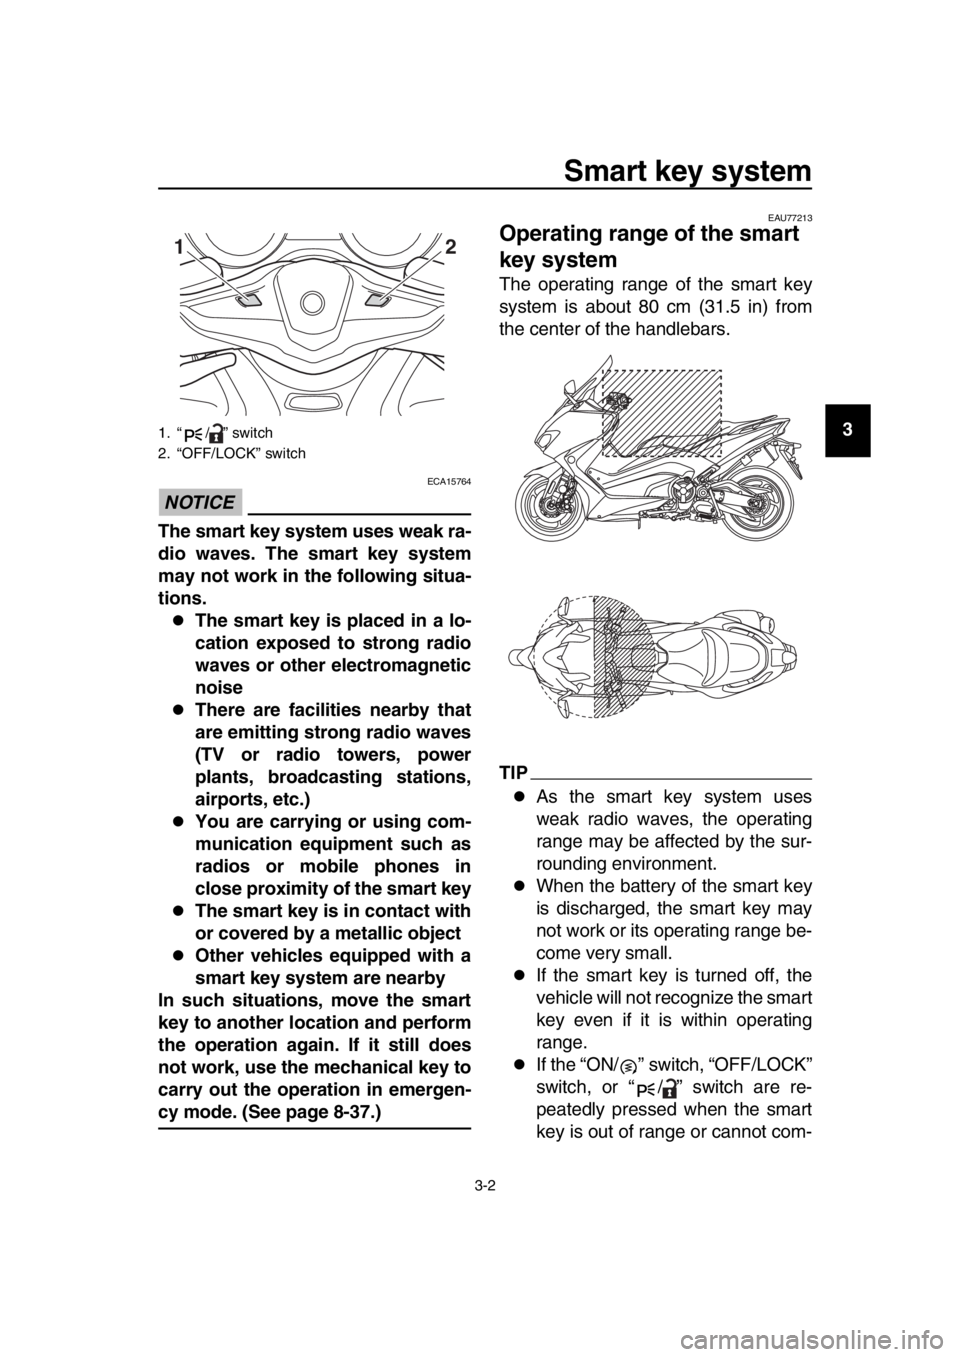 YAMAHA TMAX 2019  Owners Manual Smart key system
3-2
1
2
3
4
5
6
7
8
9
10
11
12
13
14
NOTICE
ECA15764
The smart key system uses weak ra-
dio waves. The smart key system
may not work in the following situa-
tions.
The smart key is